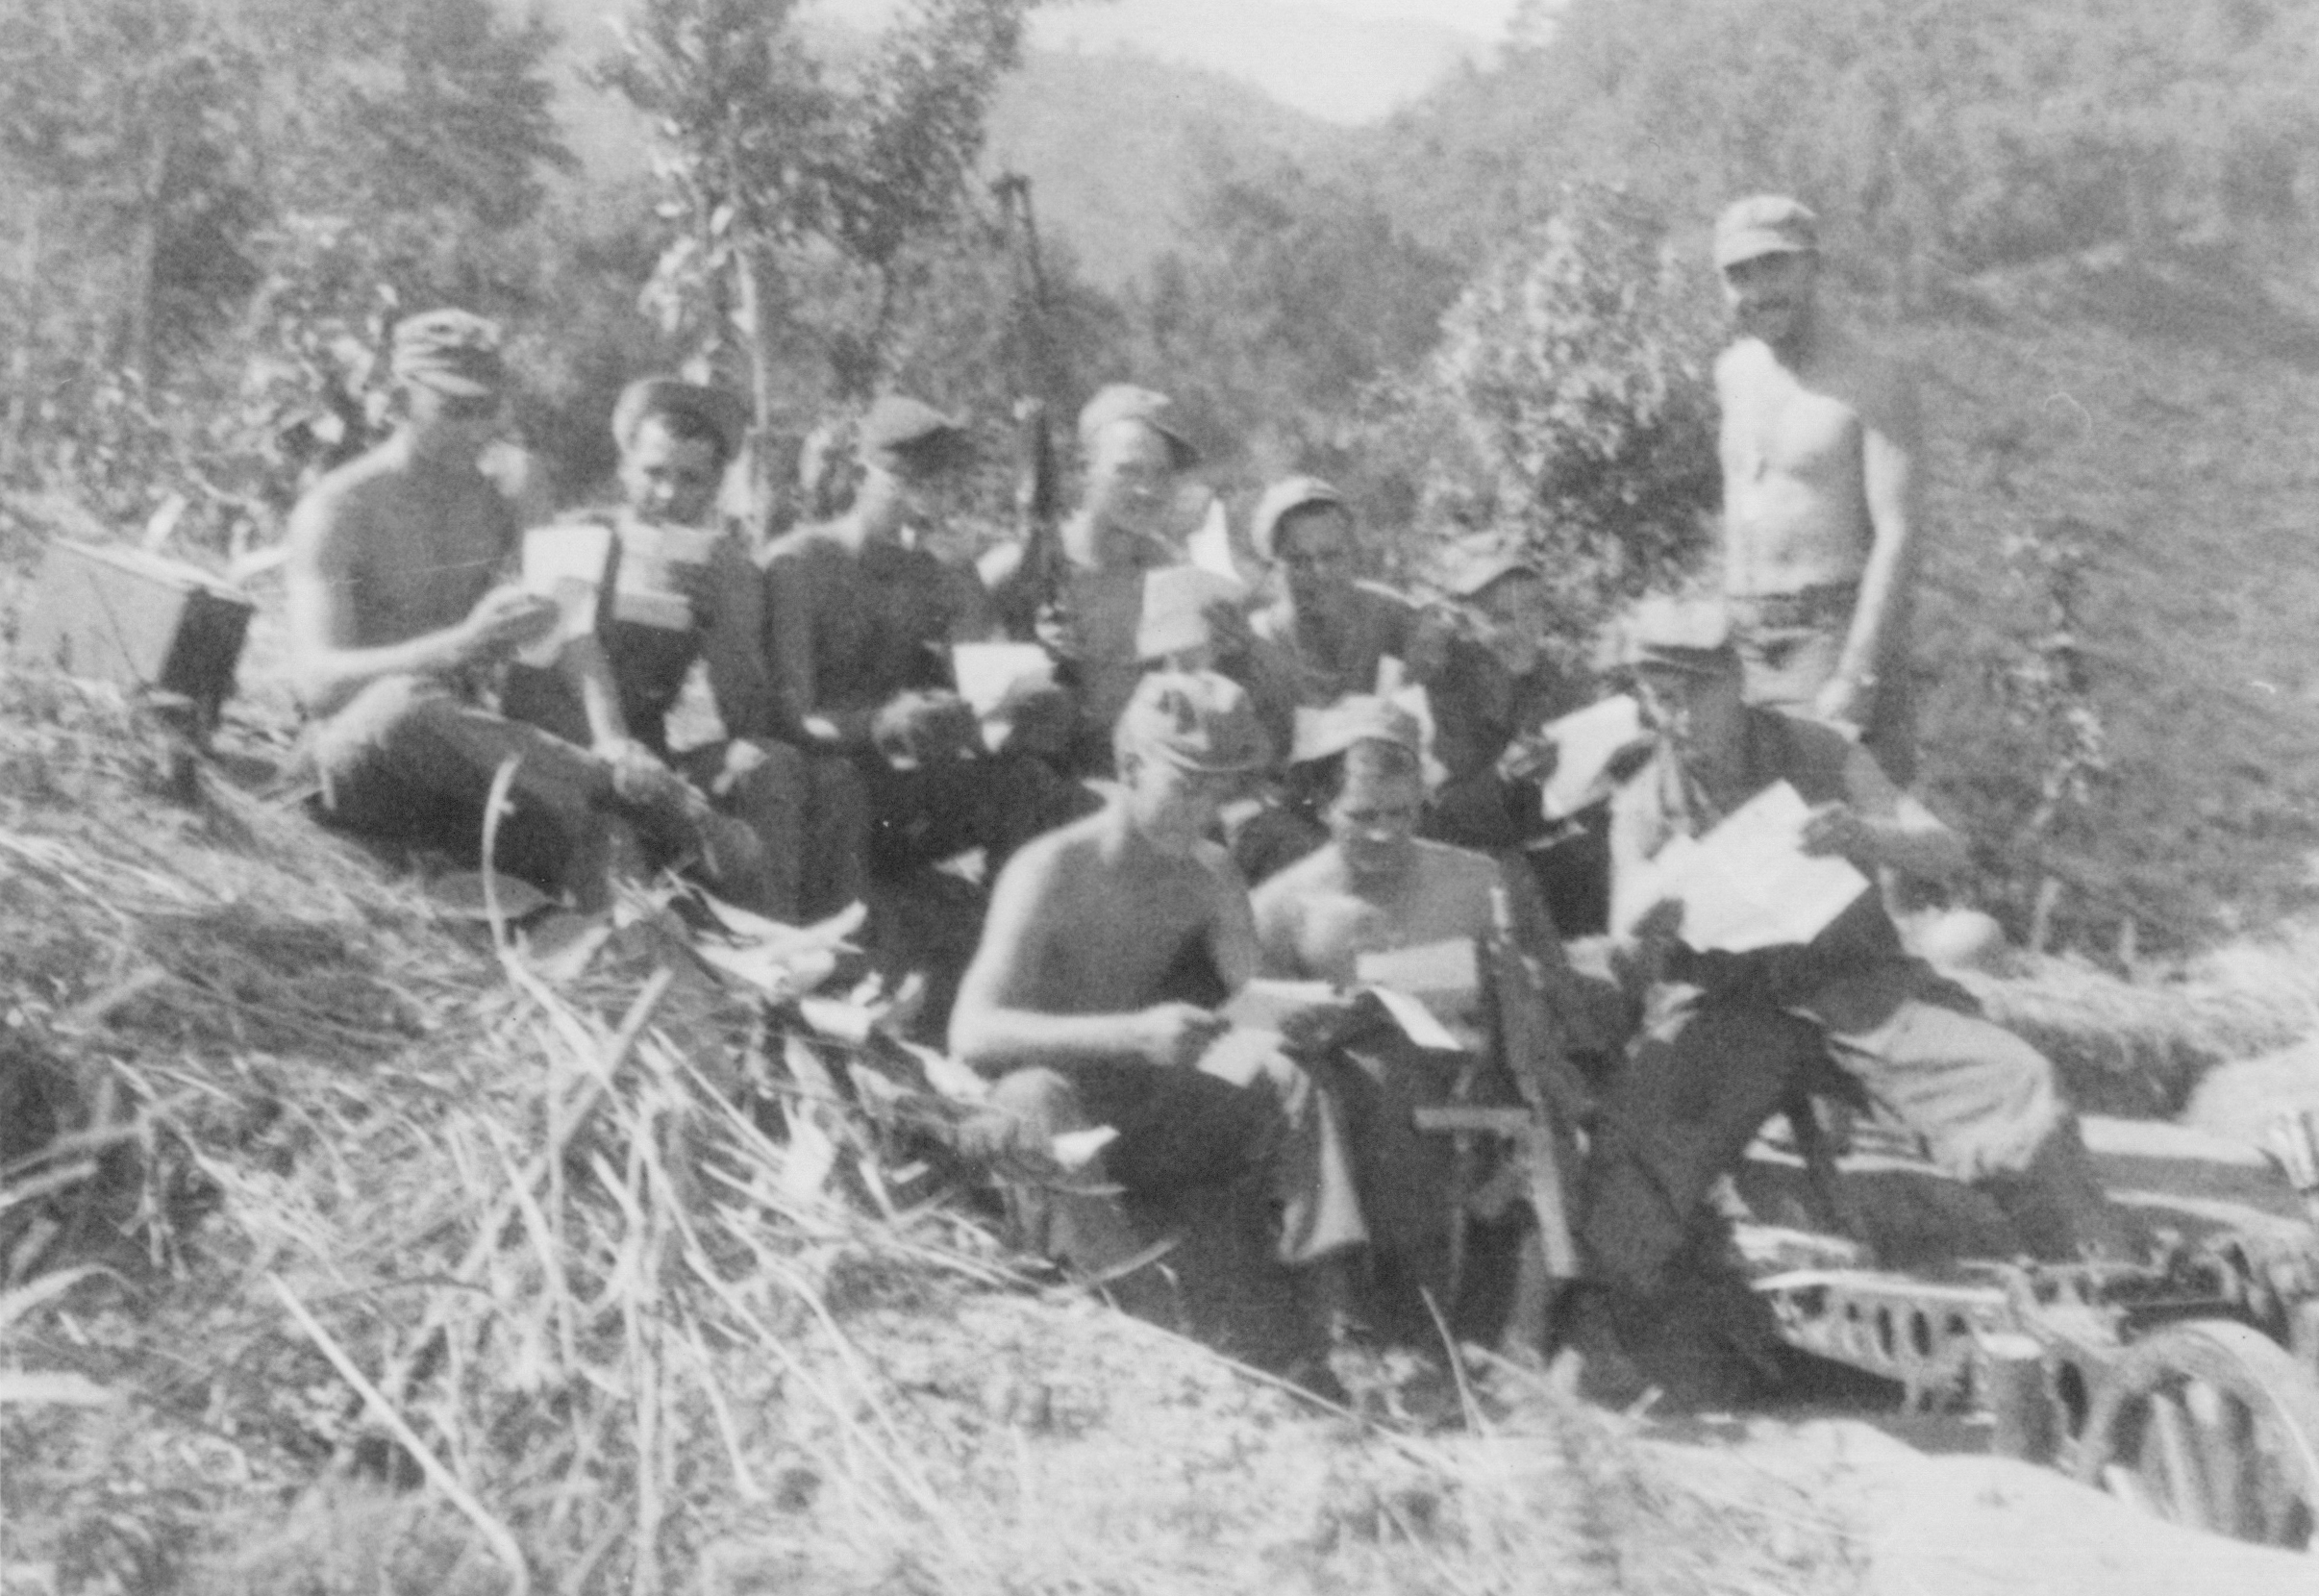 Mail call with members of US 5332nd Brigade (Provisional), probably Burma, 1945; Bartello (handing out mail), Mahl, Routson, Rokita, Frederick, and two unidentified men